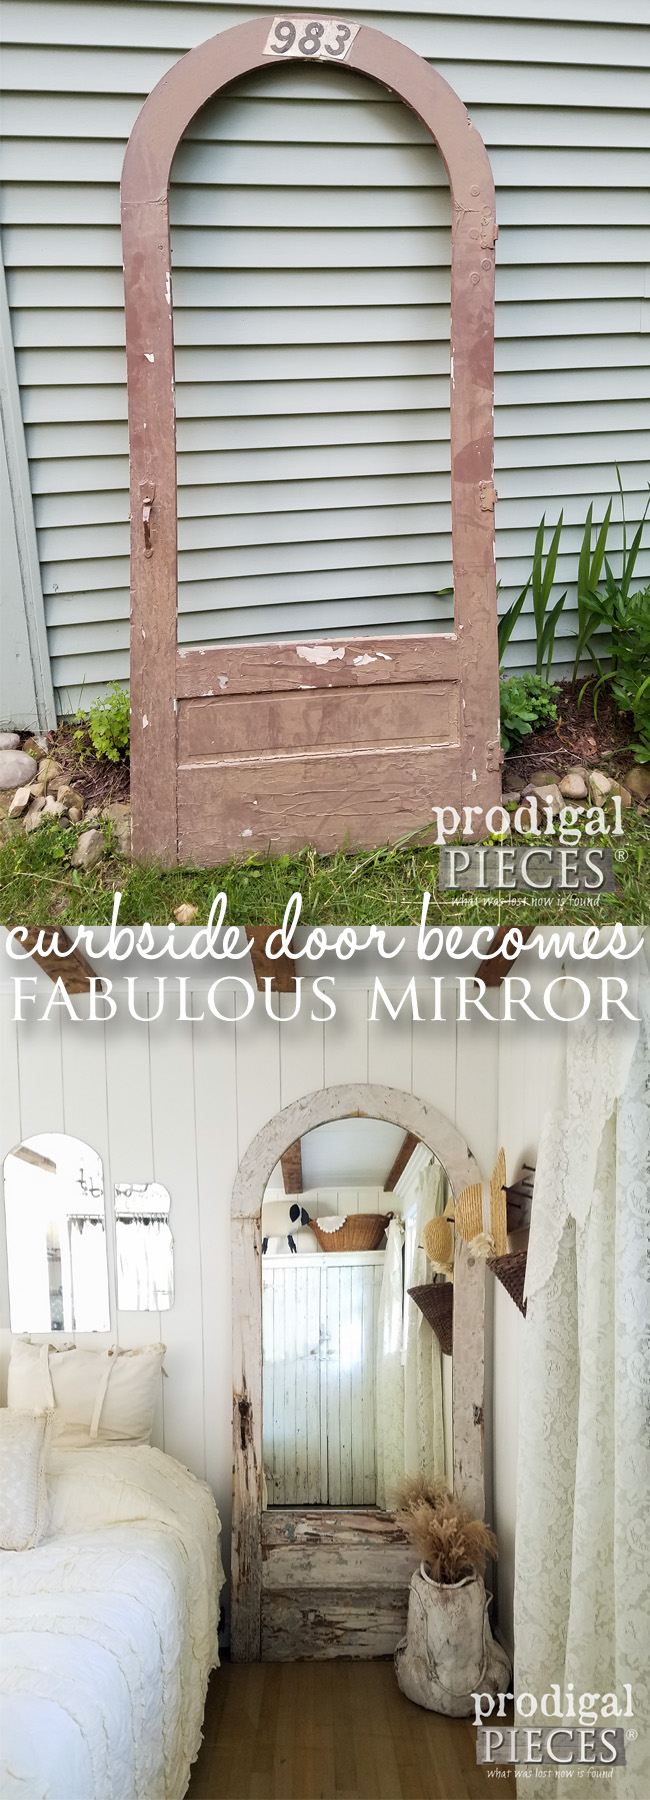 How to Turn a Curbside Door into a Repurposed Door Mirror for Farmhouse Decor by Prodigal Pieces | prodigalpieces.com